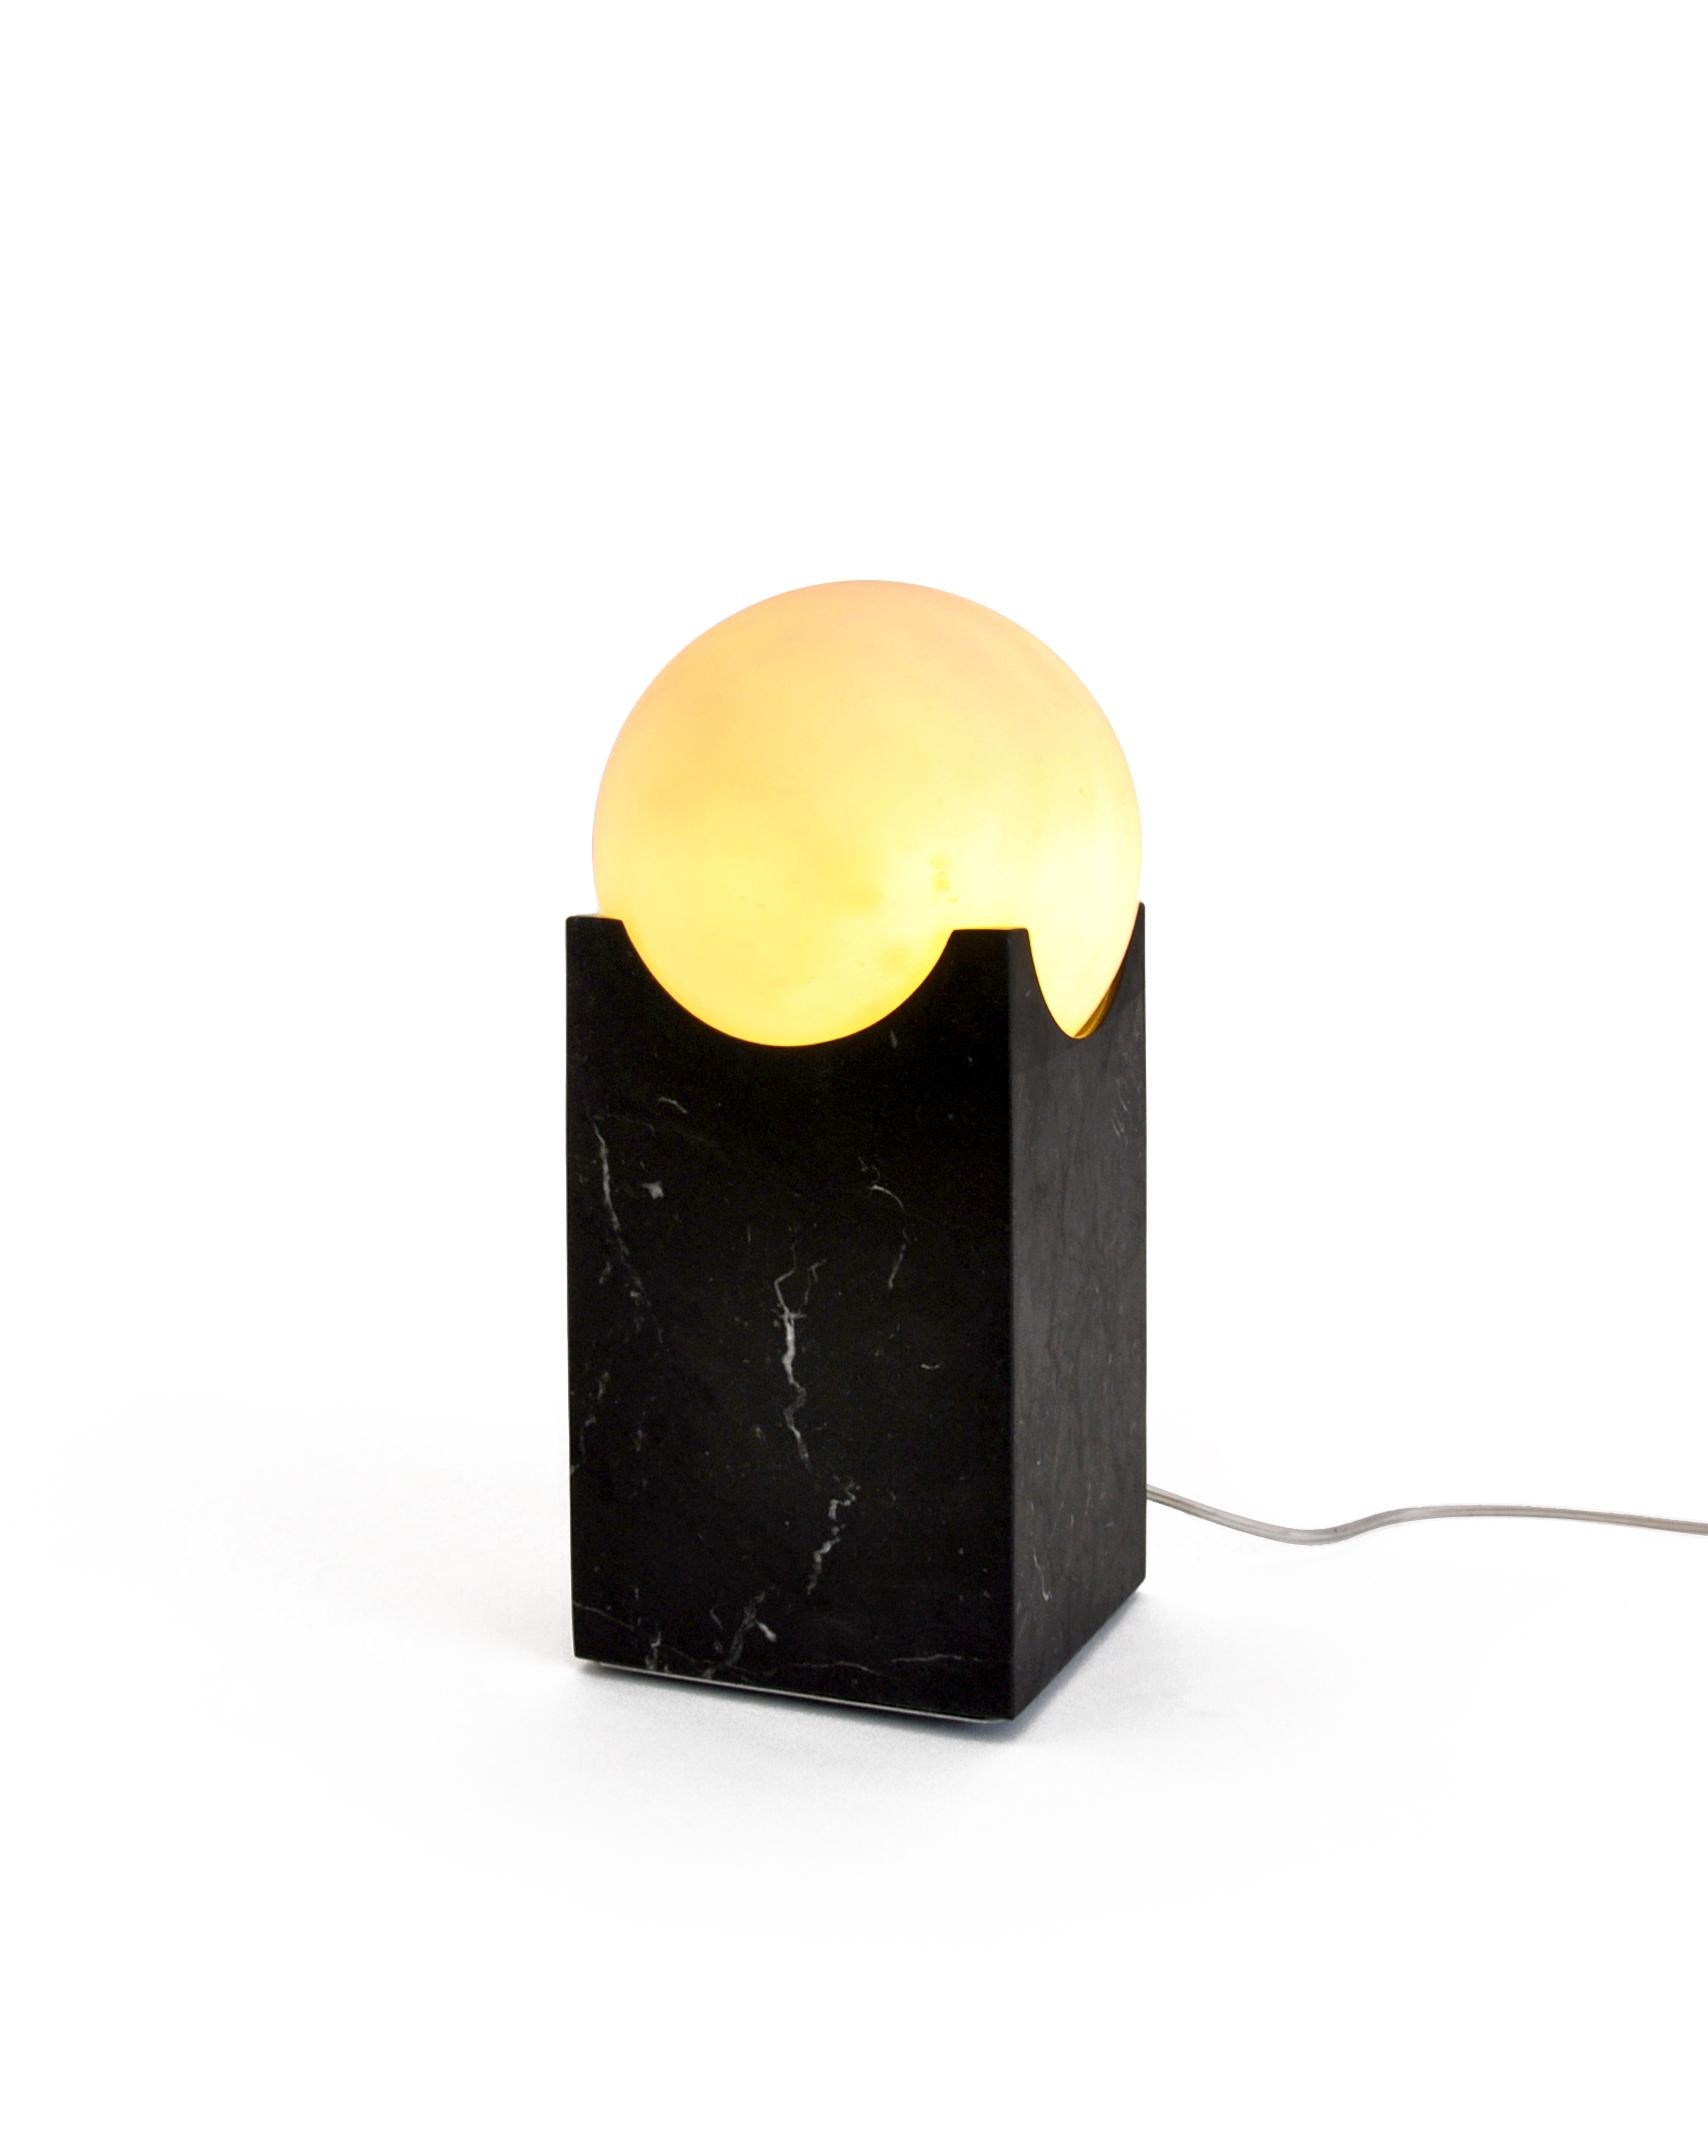 Small eclipse lamp in satin Paonazzo or black Marquina marble. It gives a distinct and elegant touch to your house.

Each piece is in a way unique (every marble block is different in veins and shades) and handmade by Italian artisans specialized